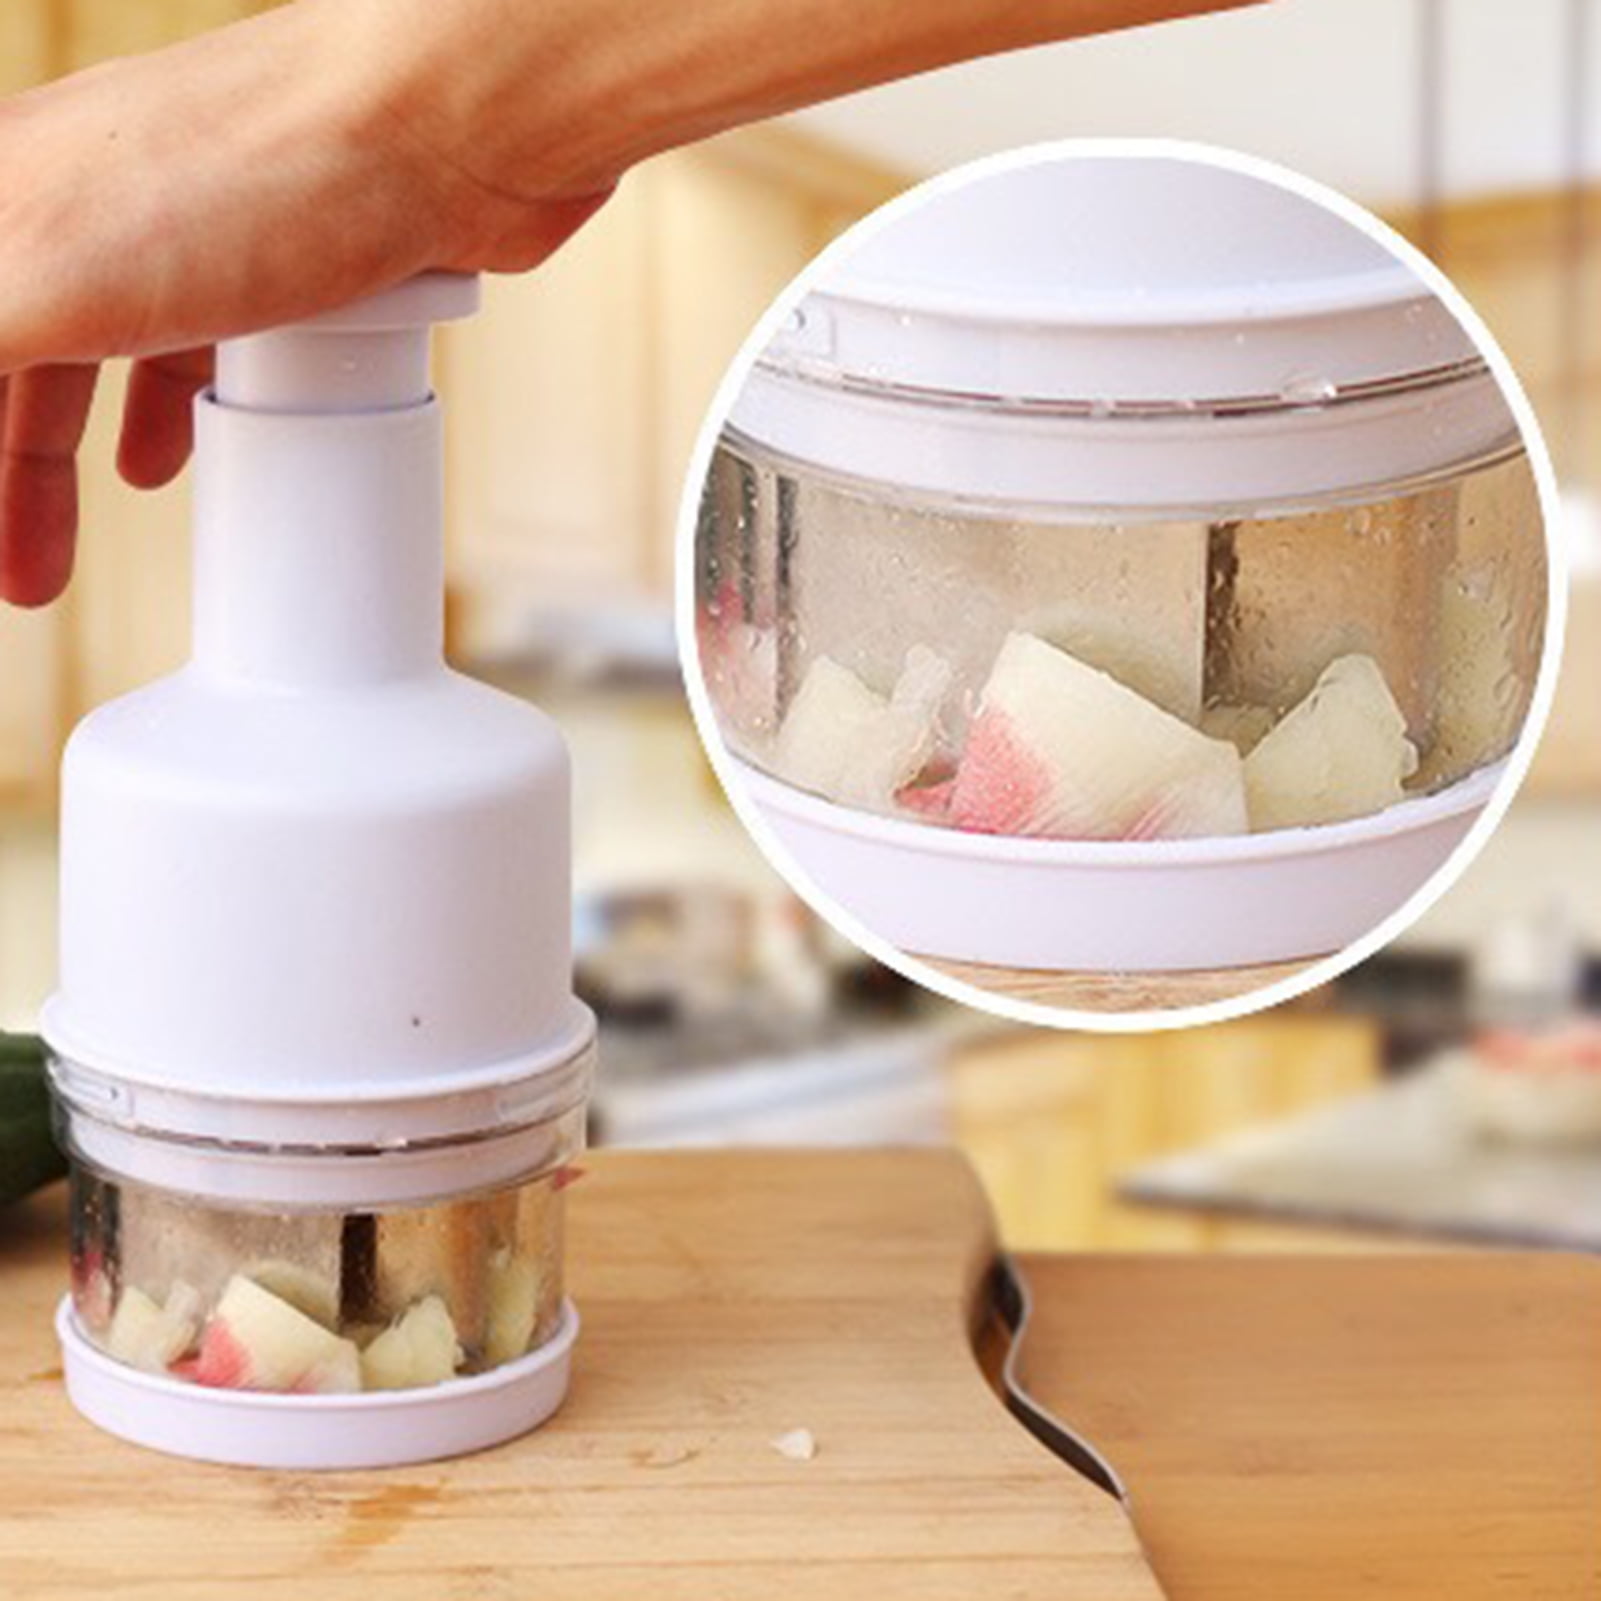 Manual Food Chopper Powerful Hand Held Chopper Mixer Processor to Chop  Vegetables Fruits Nuts Onions Garlic Salad for Kitchen (3.5 cup) by Vinipiak